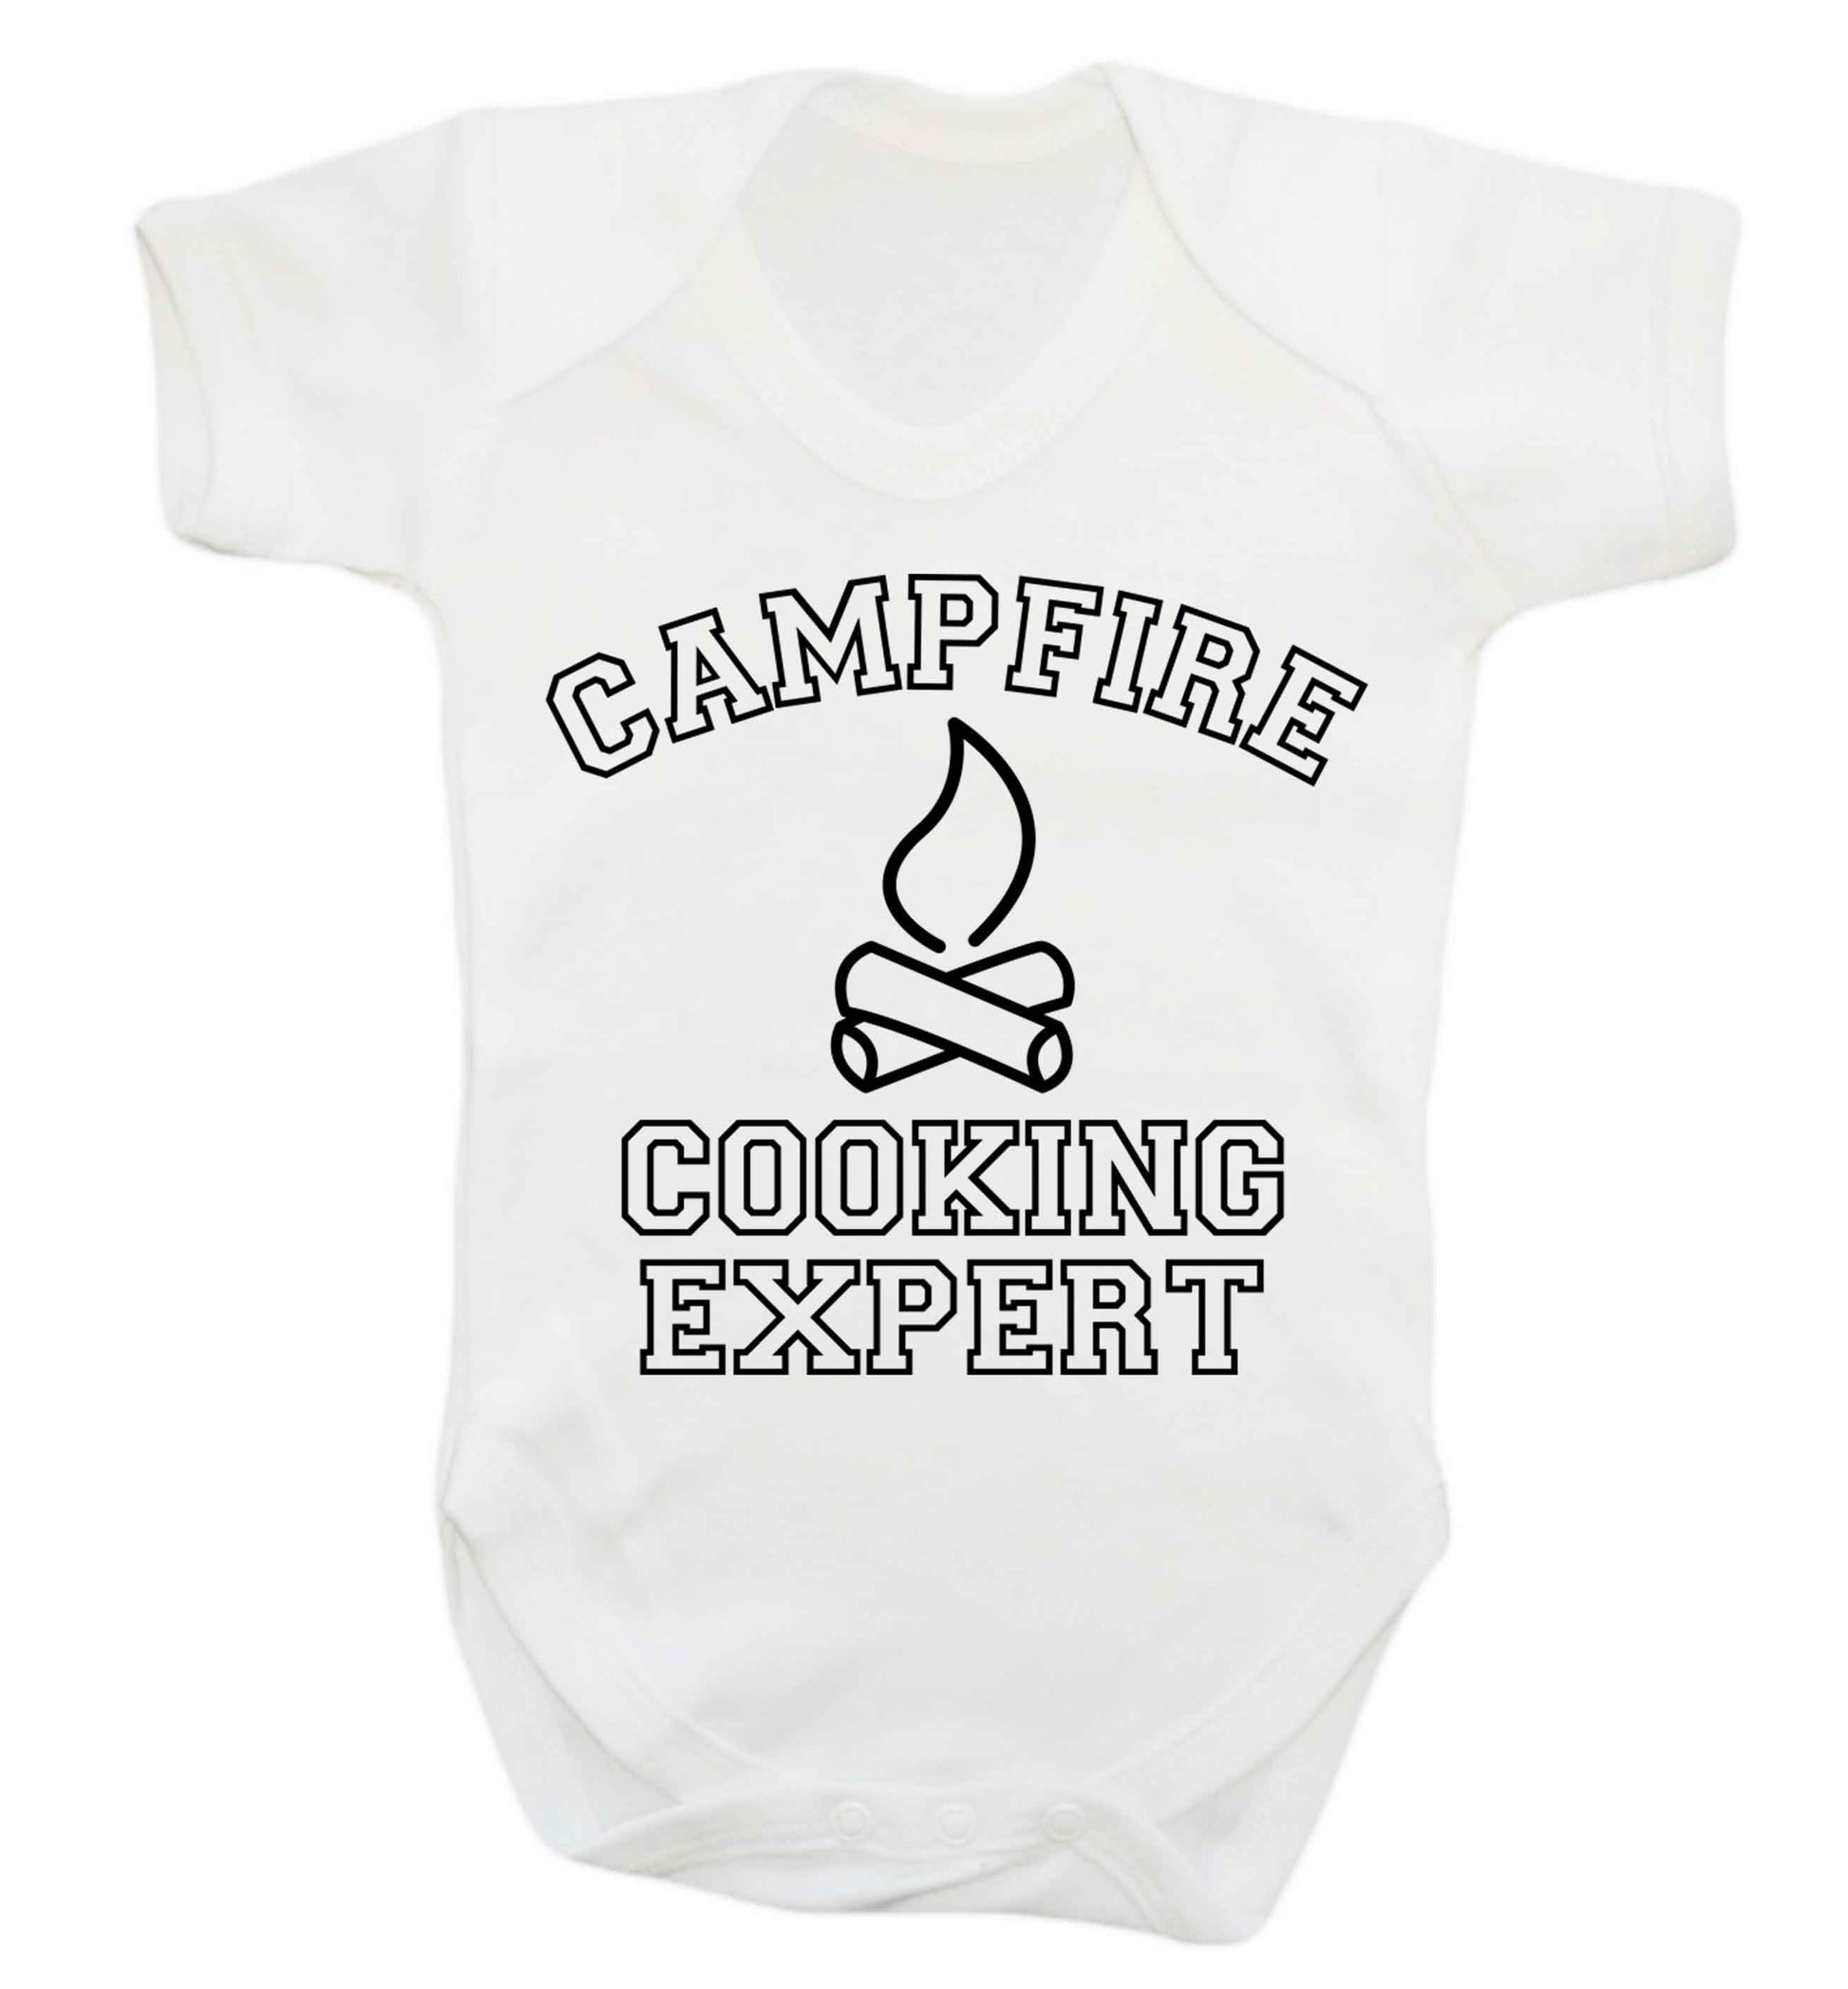 Campfire cooking expert Baby Vest white 18-24 months